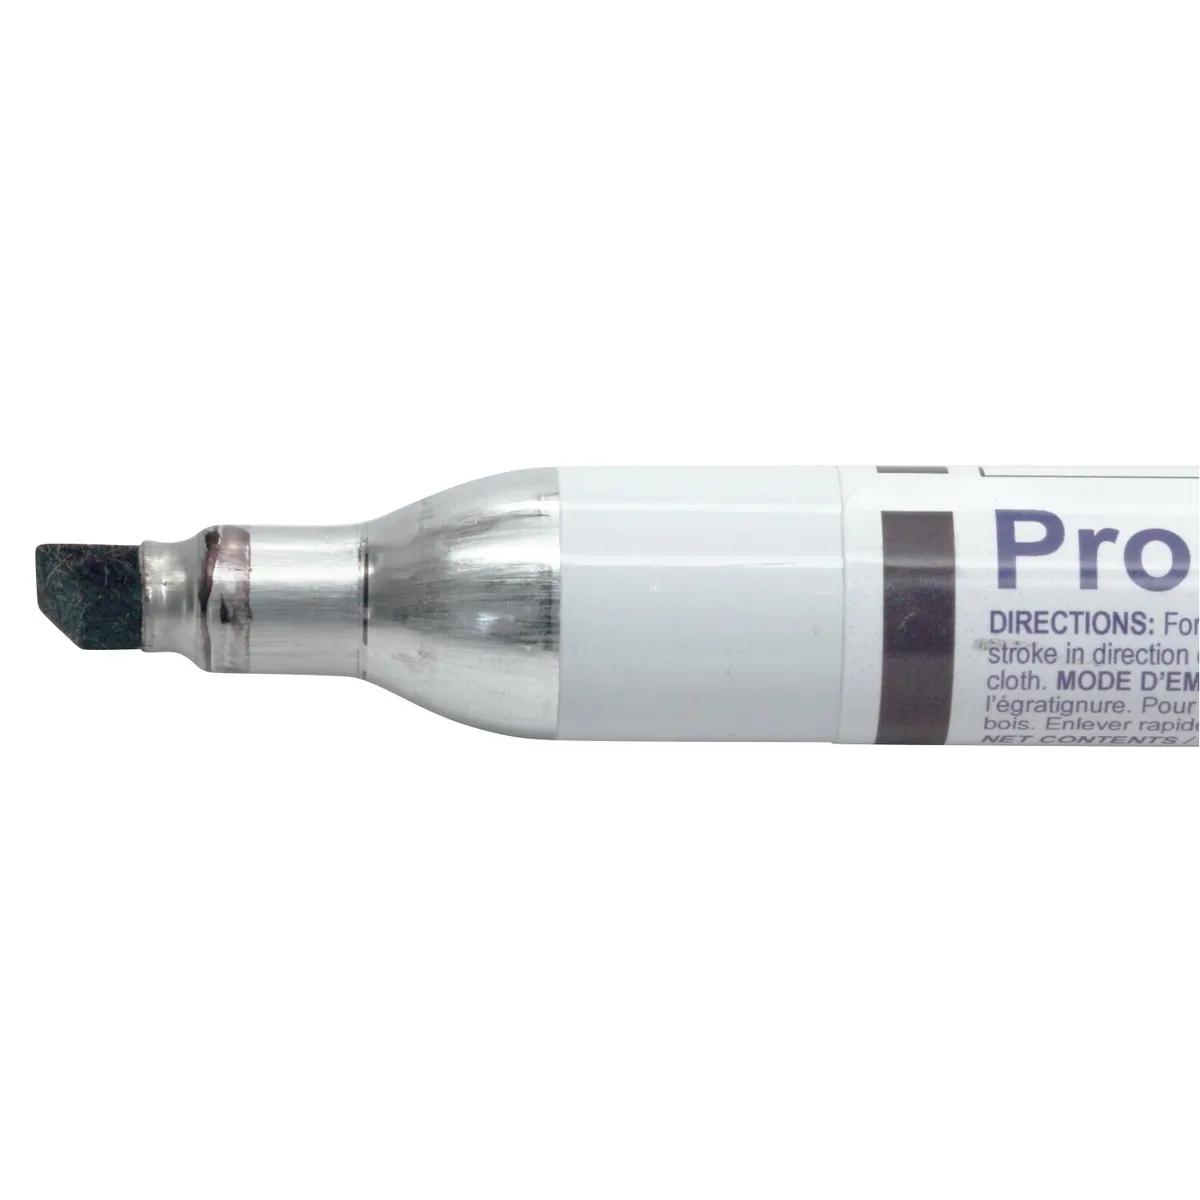 Mohawk Furniture Pro Mark II Touch Up Stain Marker, Black Brown